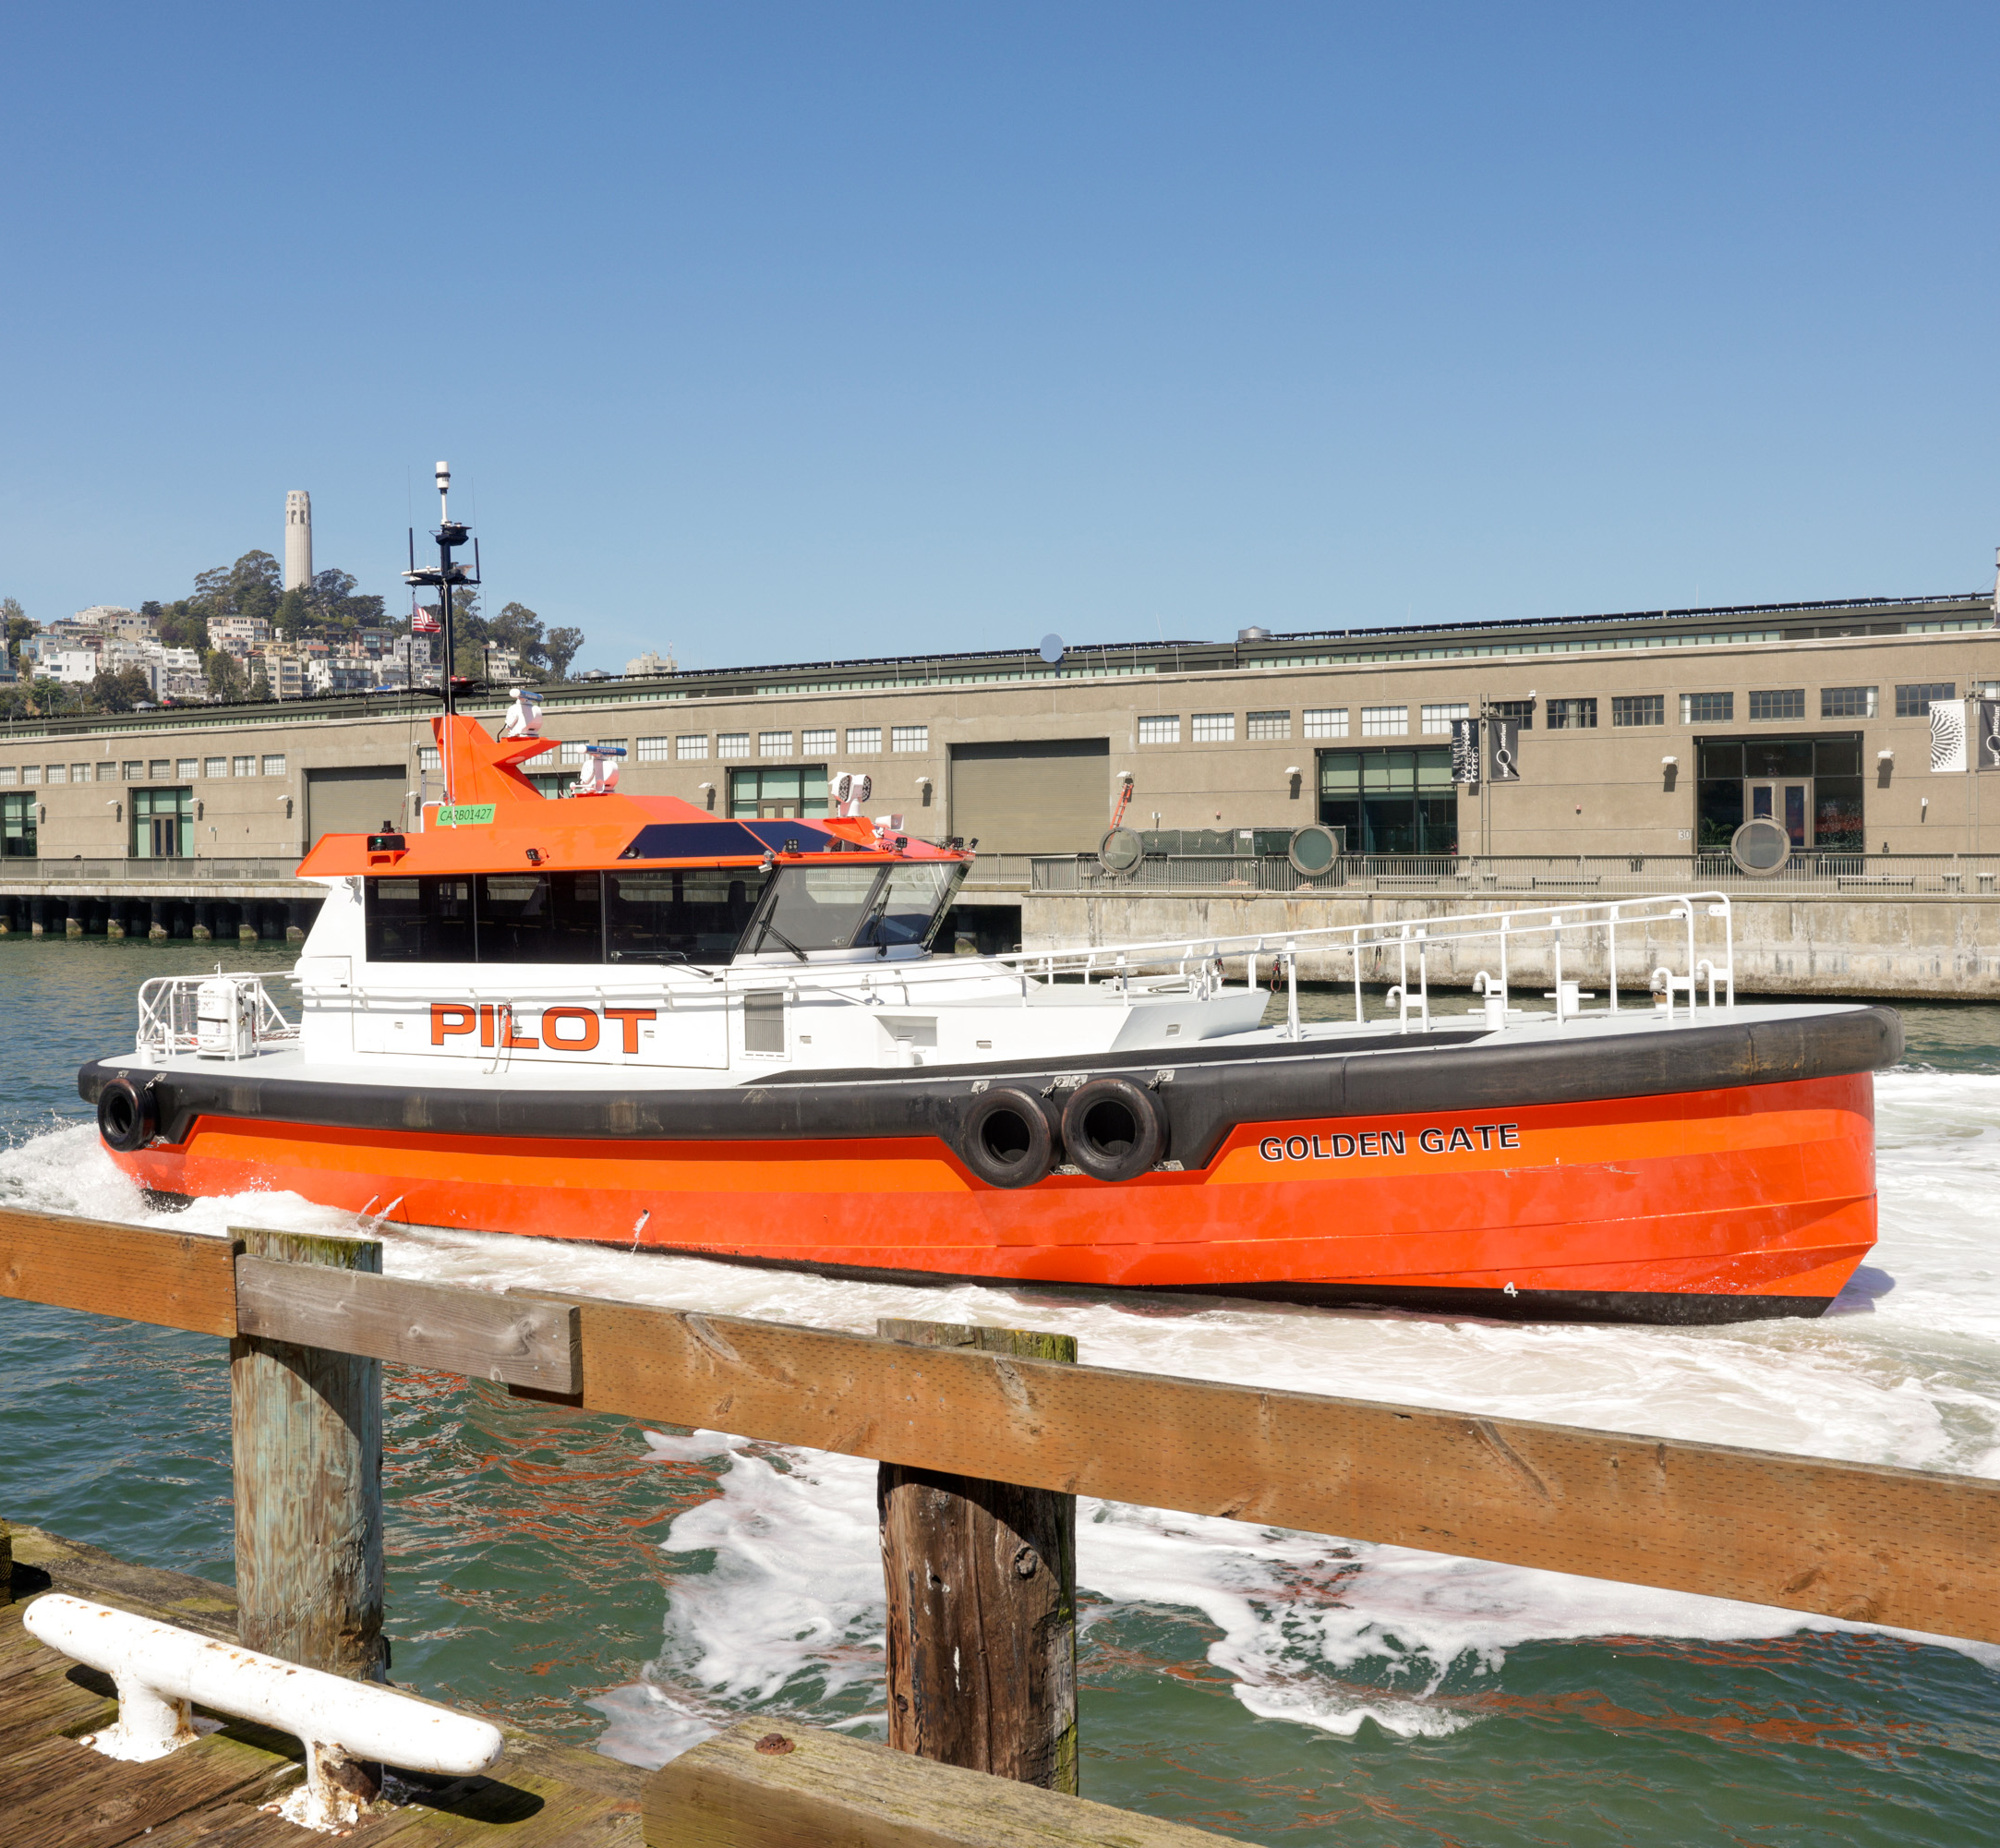 An orange and white pilot boat named &quot;GOLDEN GATE&quot; navigates near a pier with a city hill backdrop.